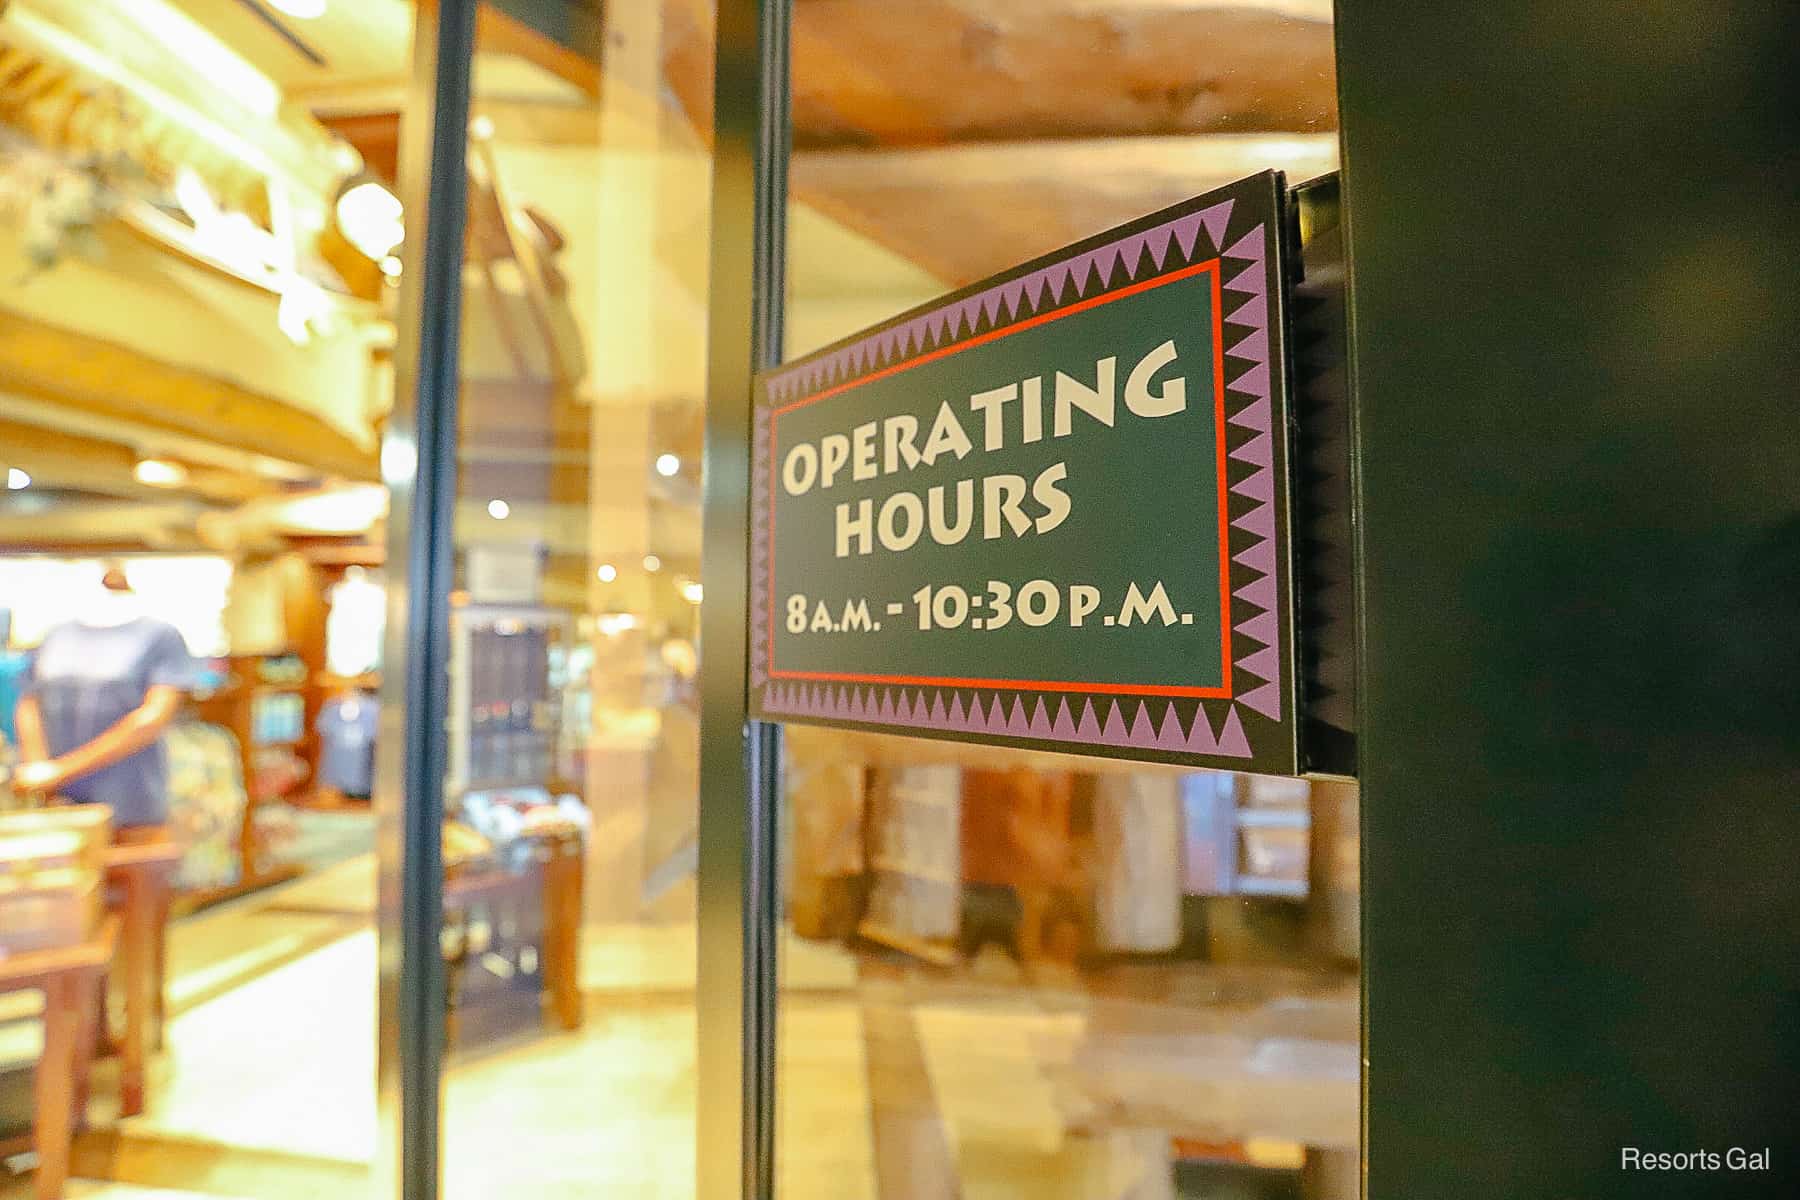 operating hours for Wilderness Lodge Mercantile 